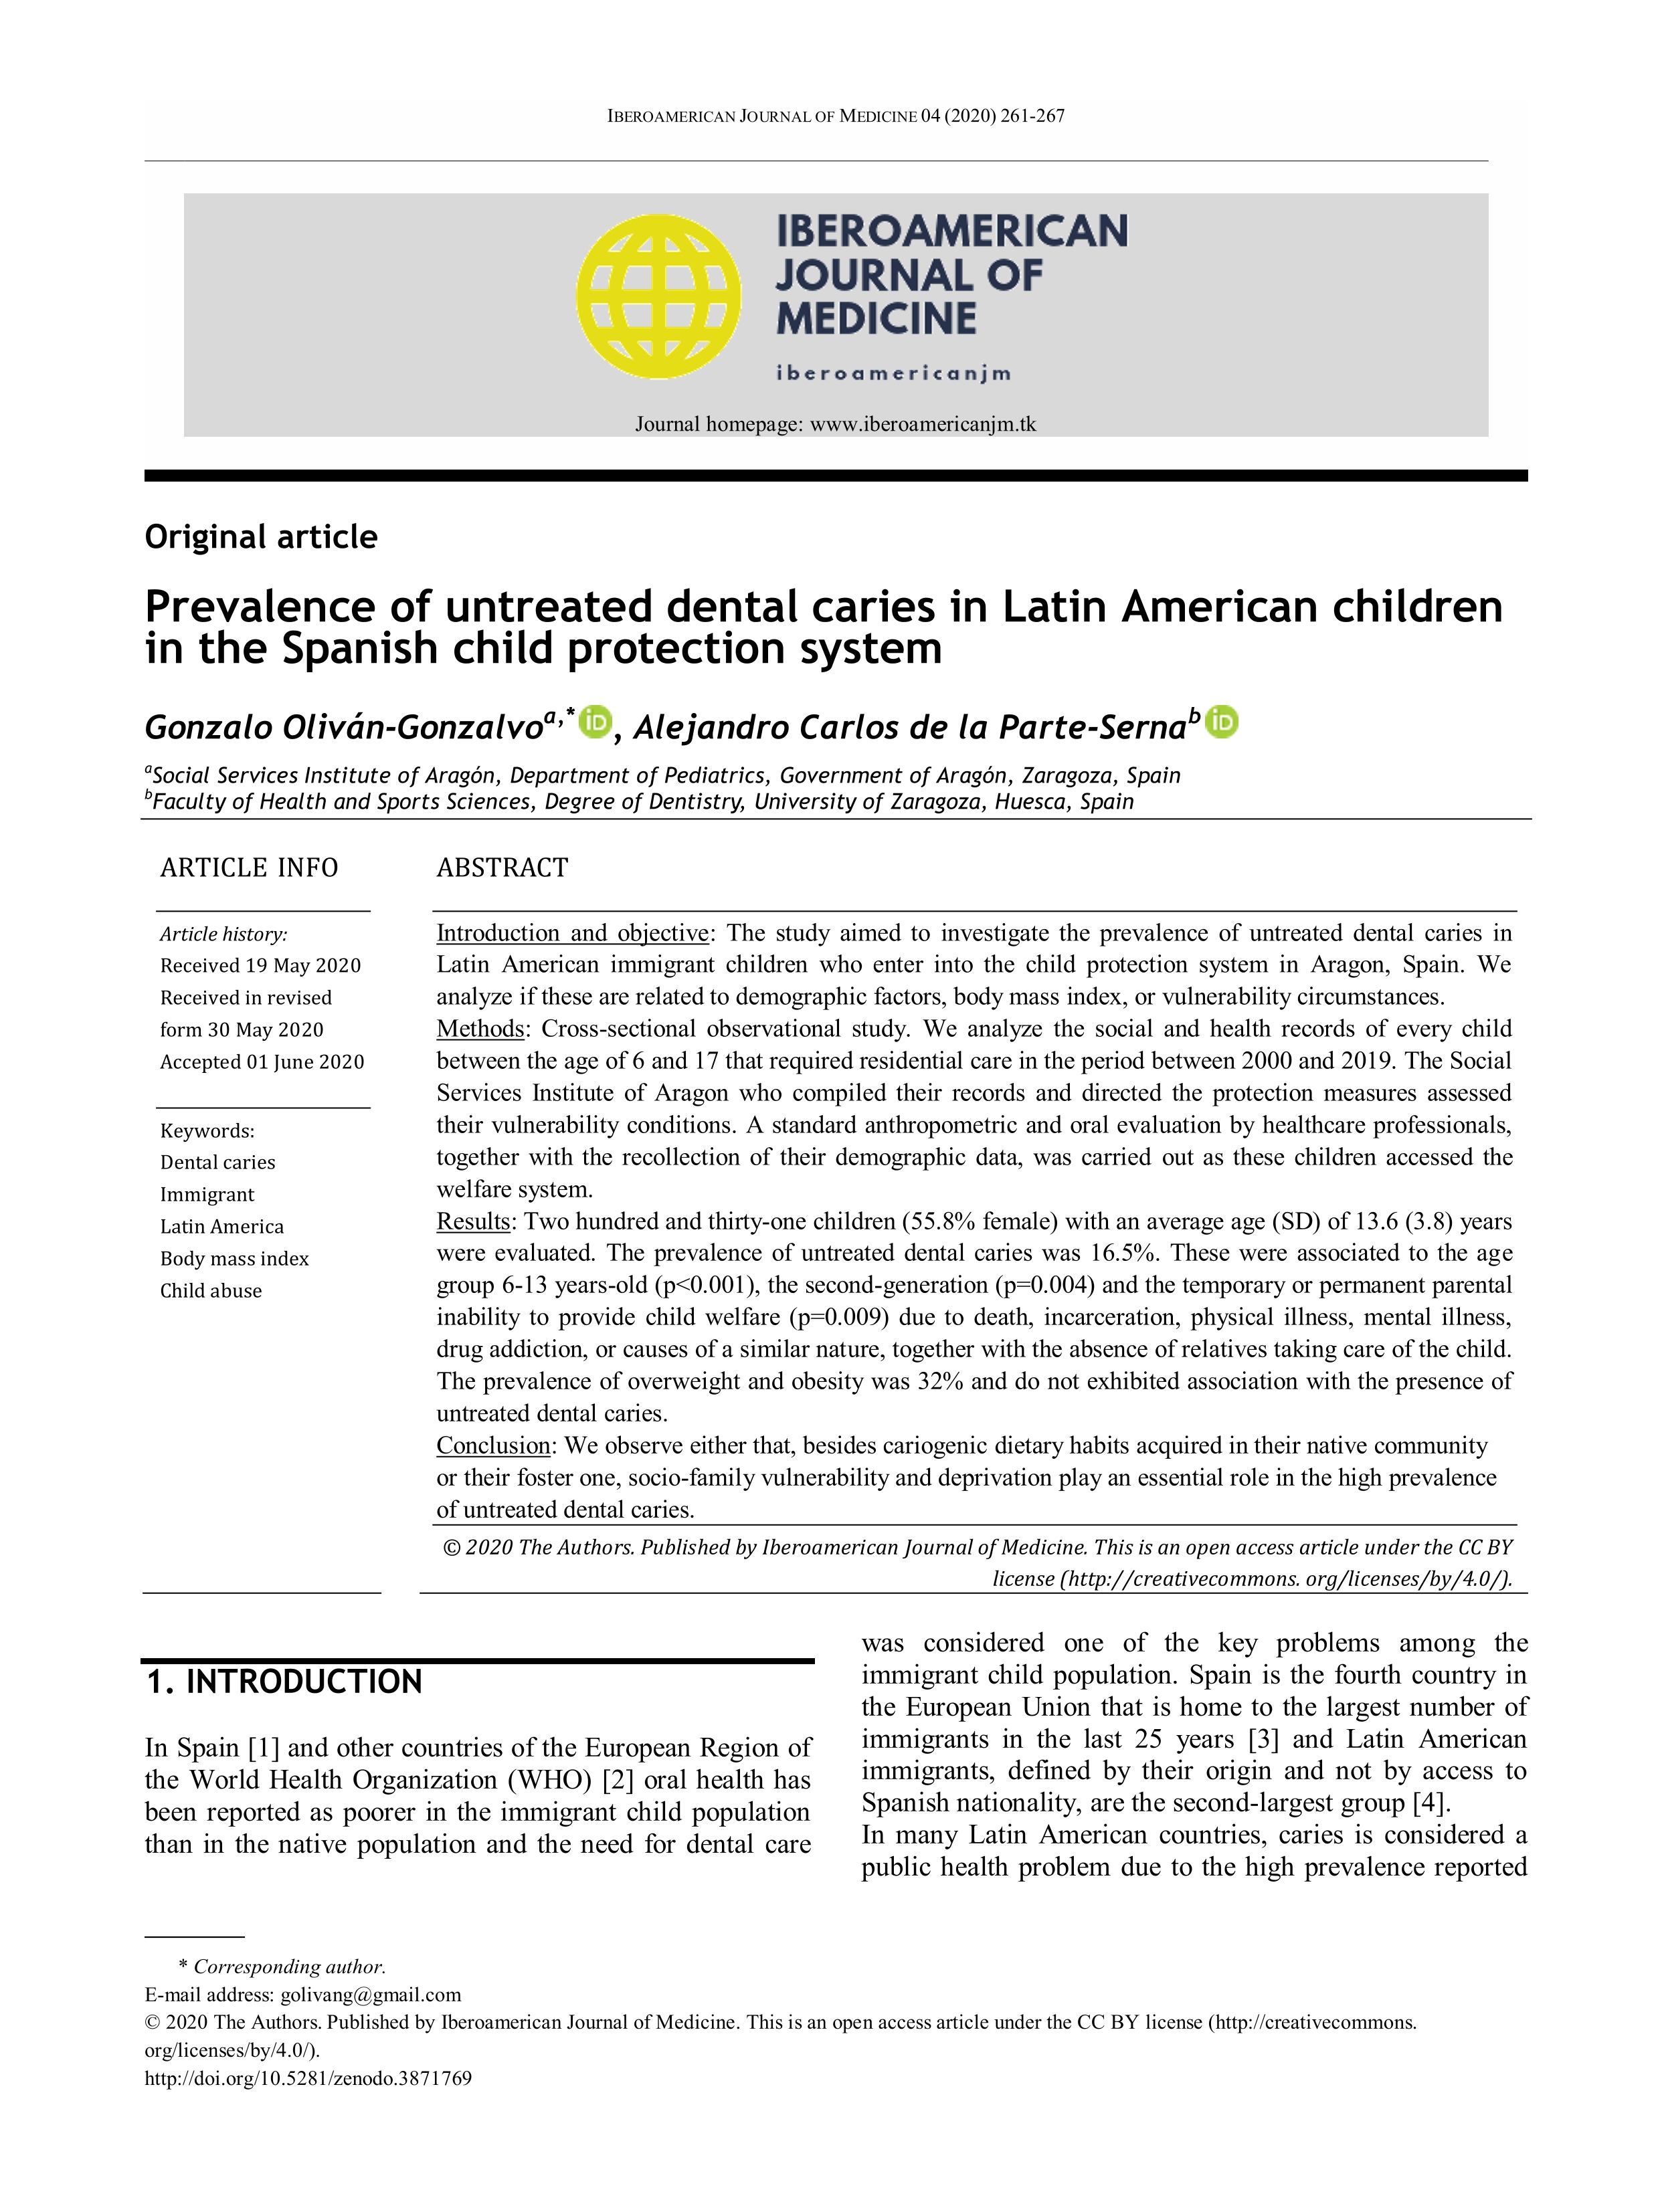 Prevalence of untreated dental caries in Latin American children in the Spanish child protection system